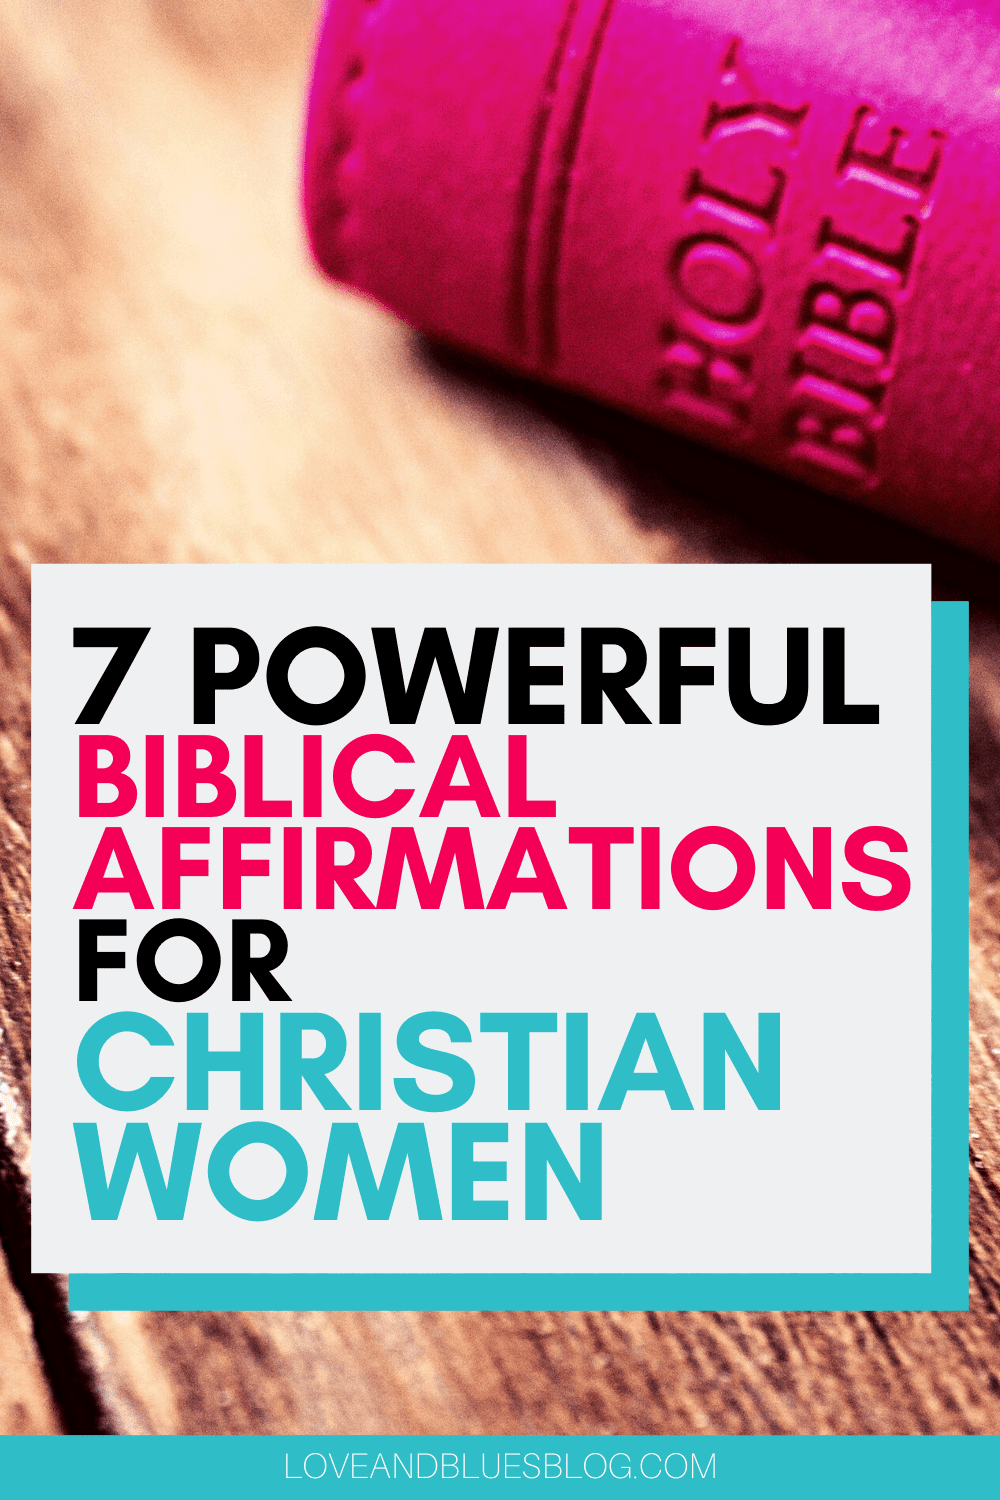 Amazing biblical affirmations based on SCRIPTURE to help strengthen the Christian woman! a MUST read in this day and age!